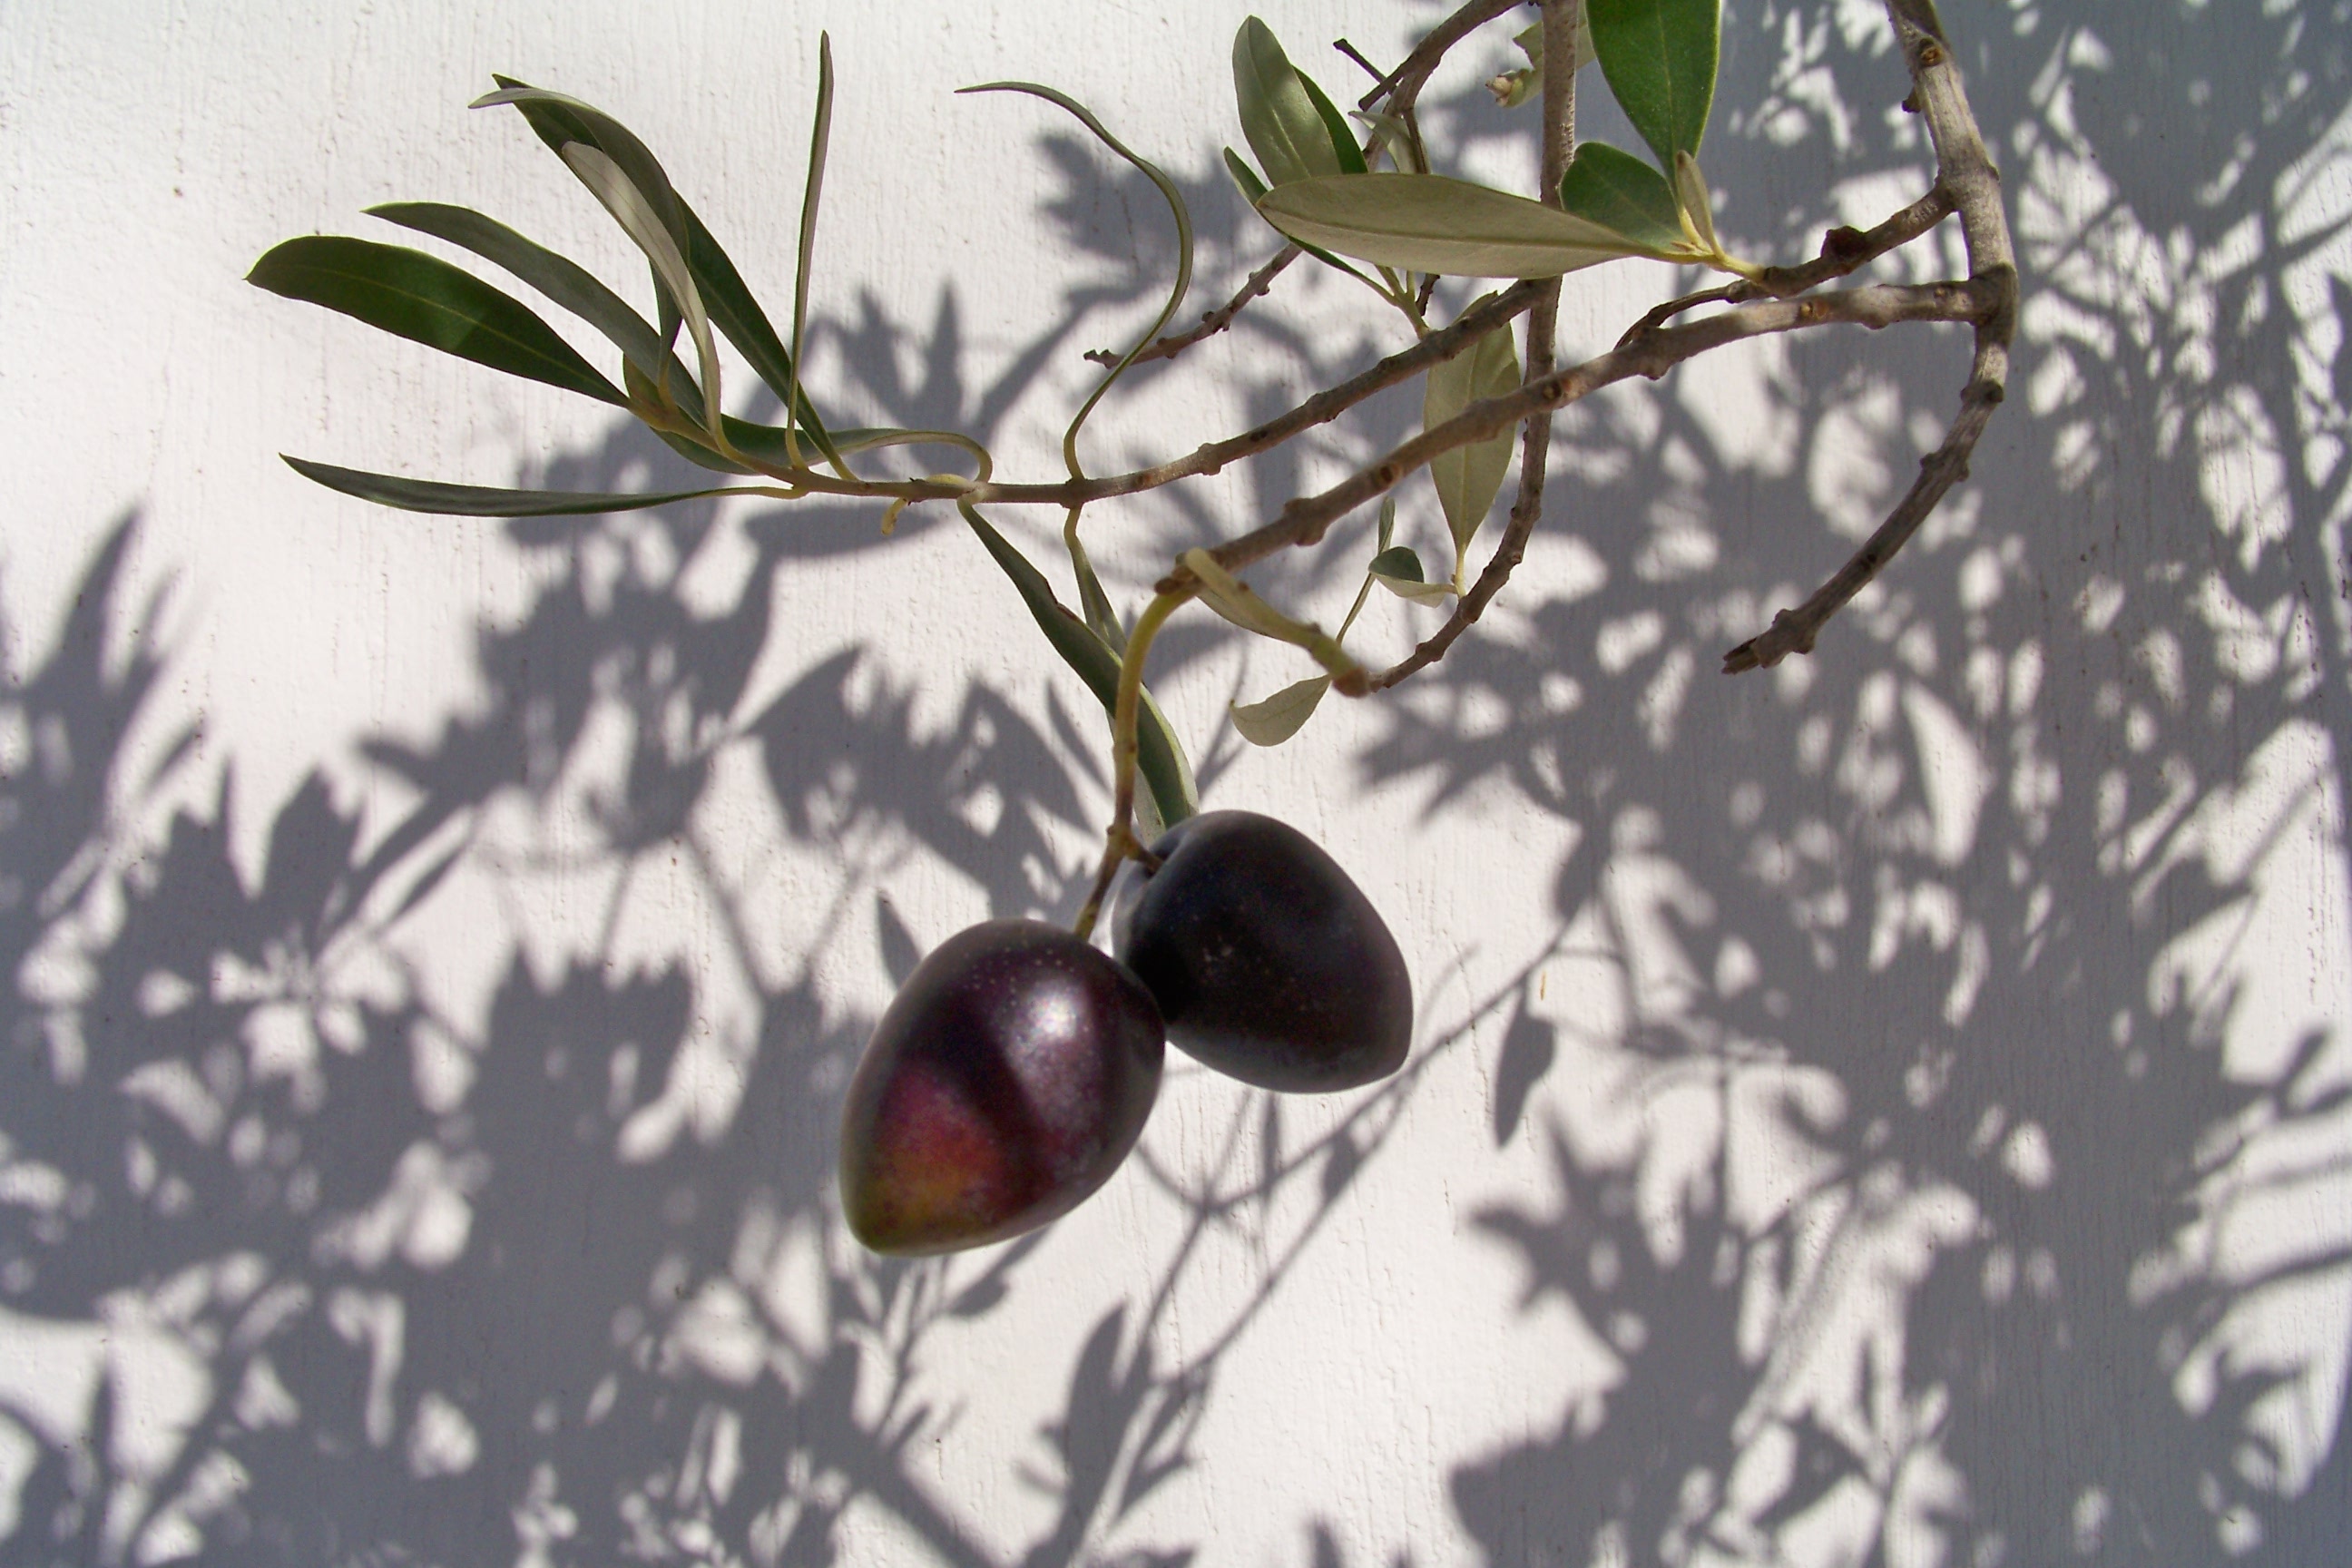 Olive Tree Cast Shadows | Pics4Learning